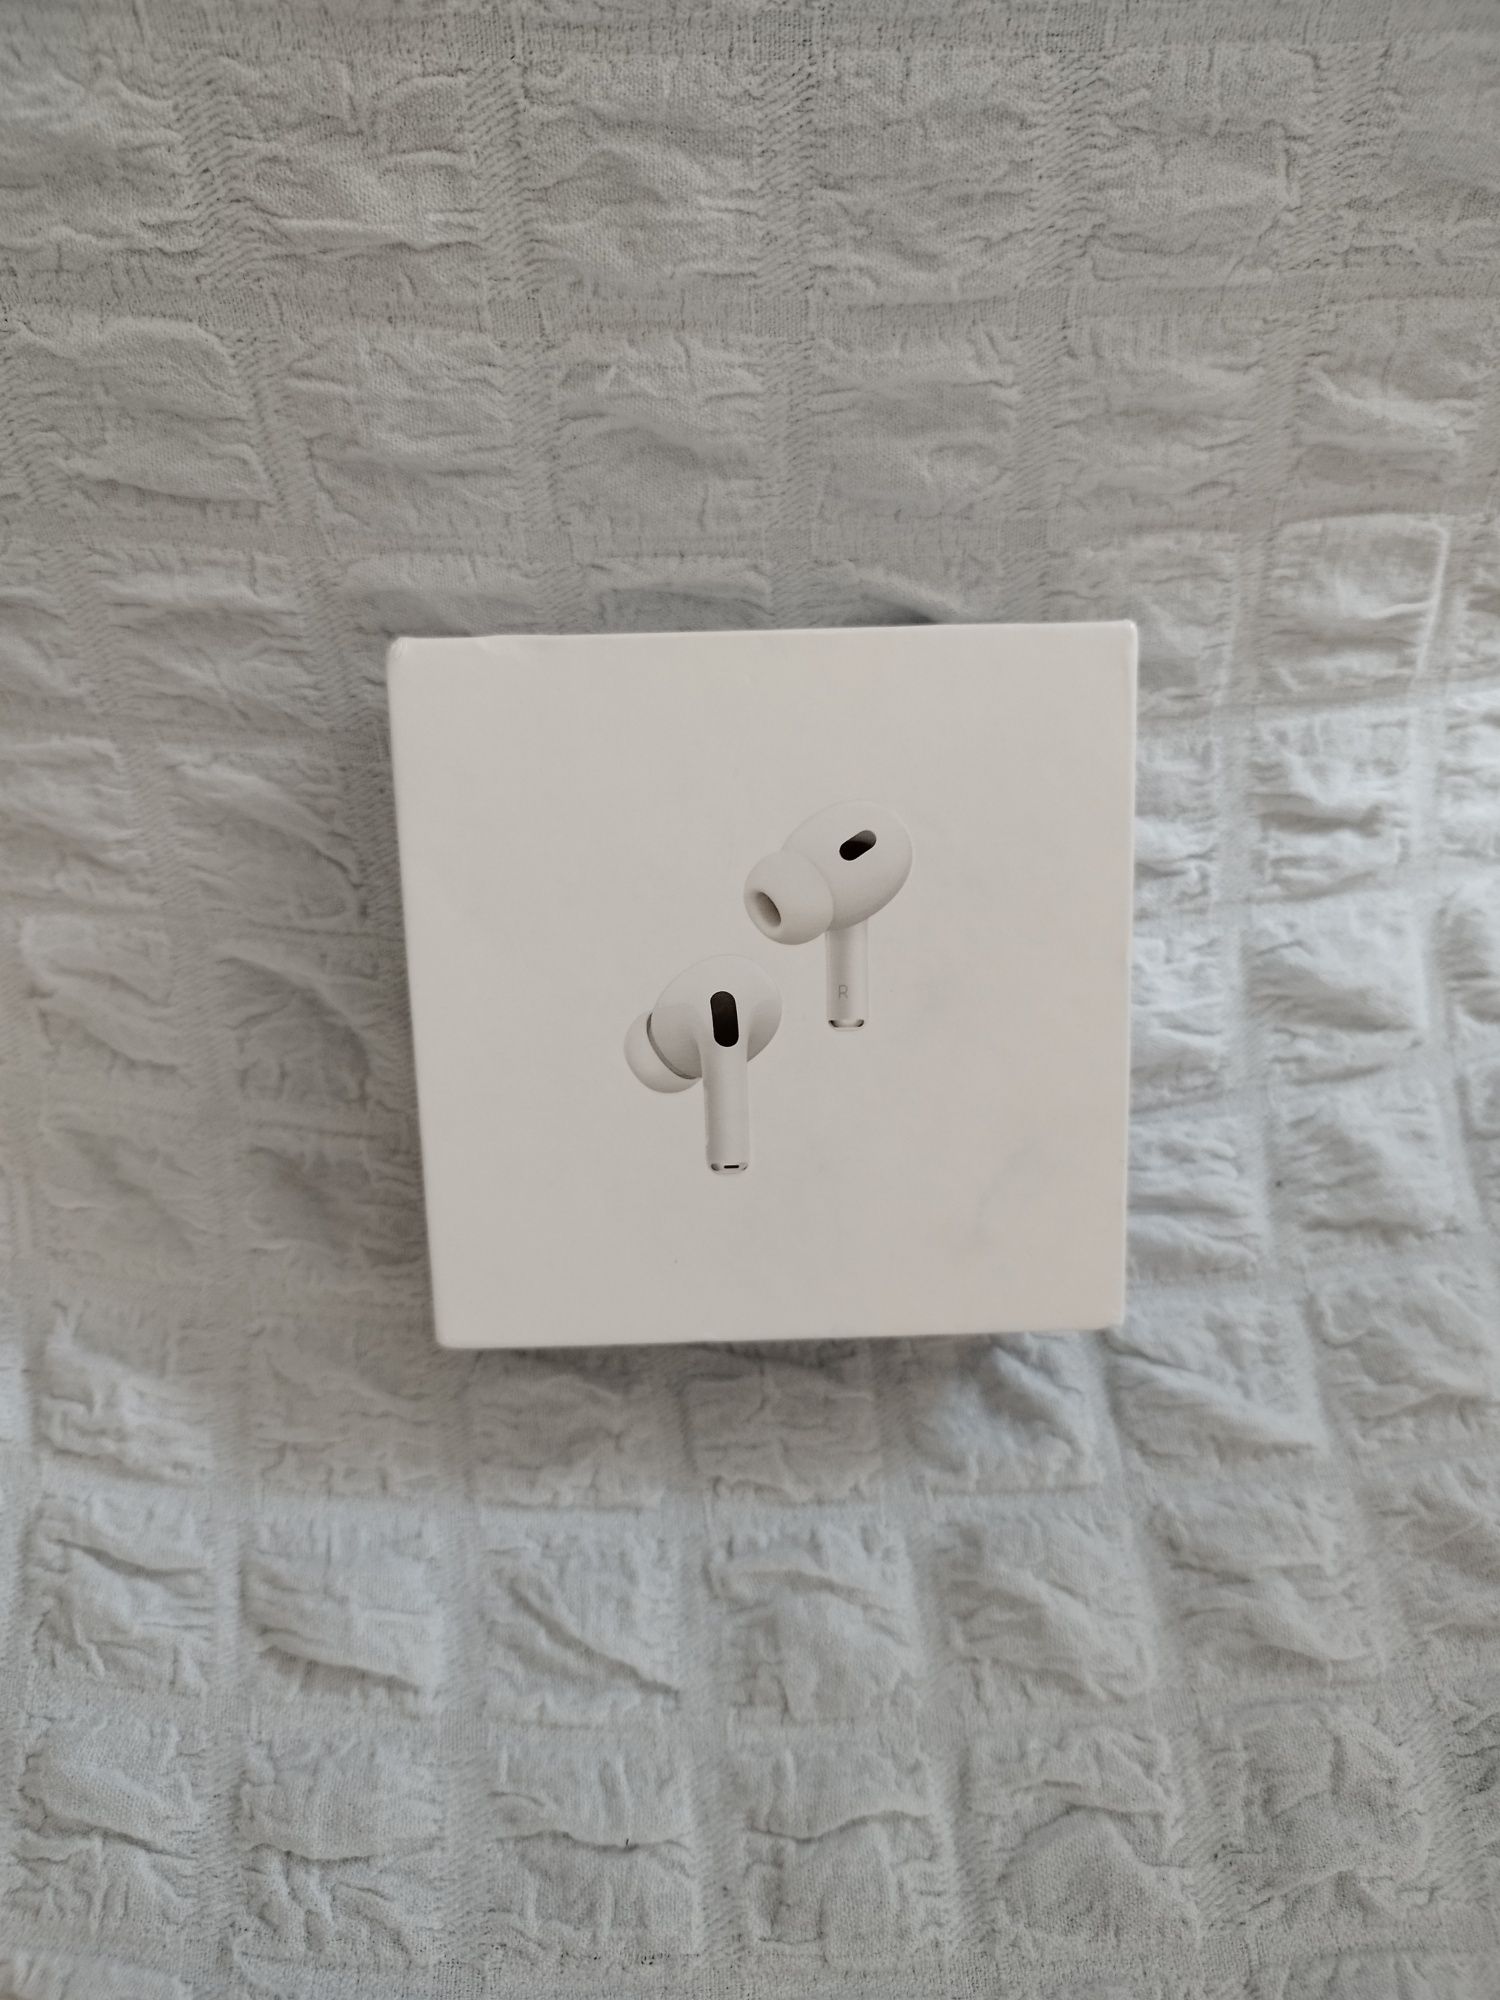 Generation 2 AirPods Pro 2